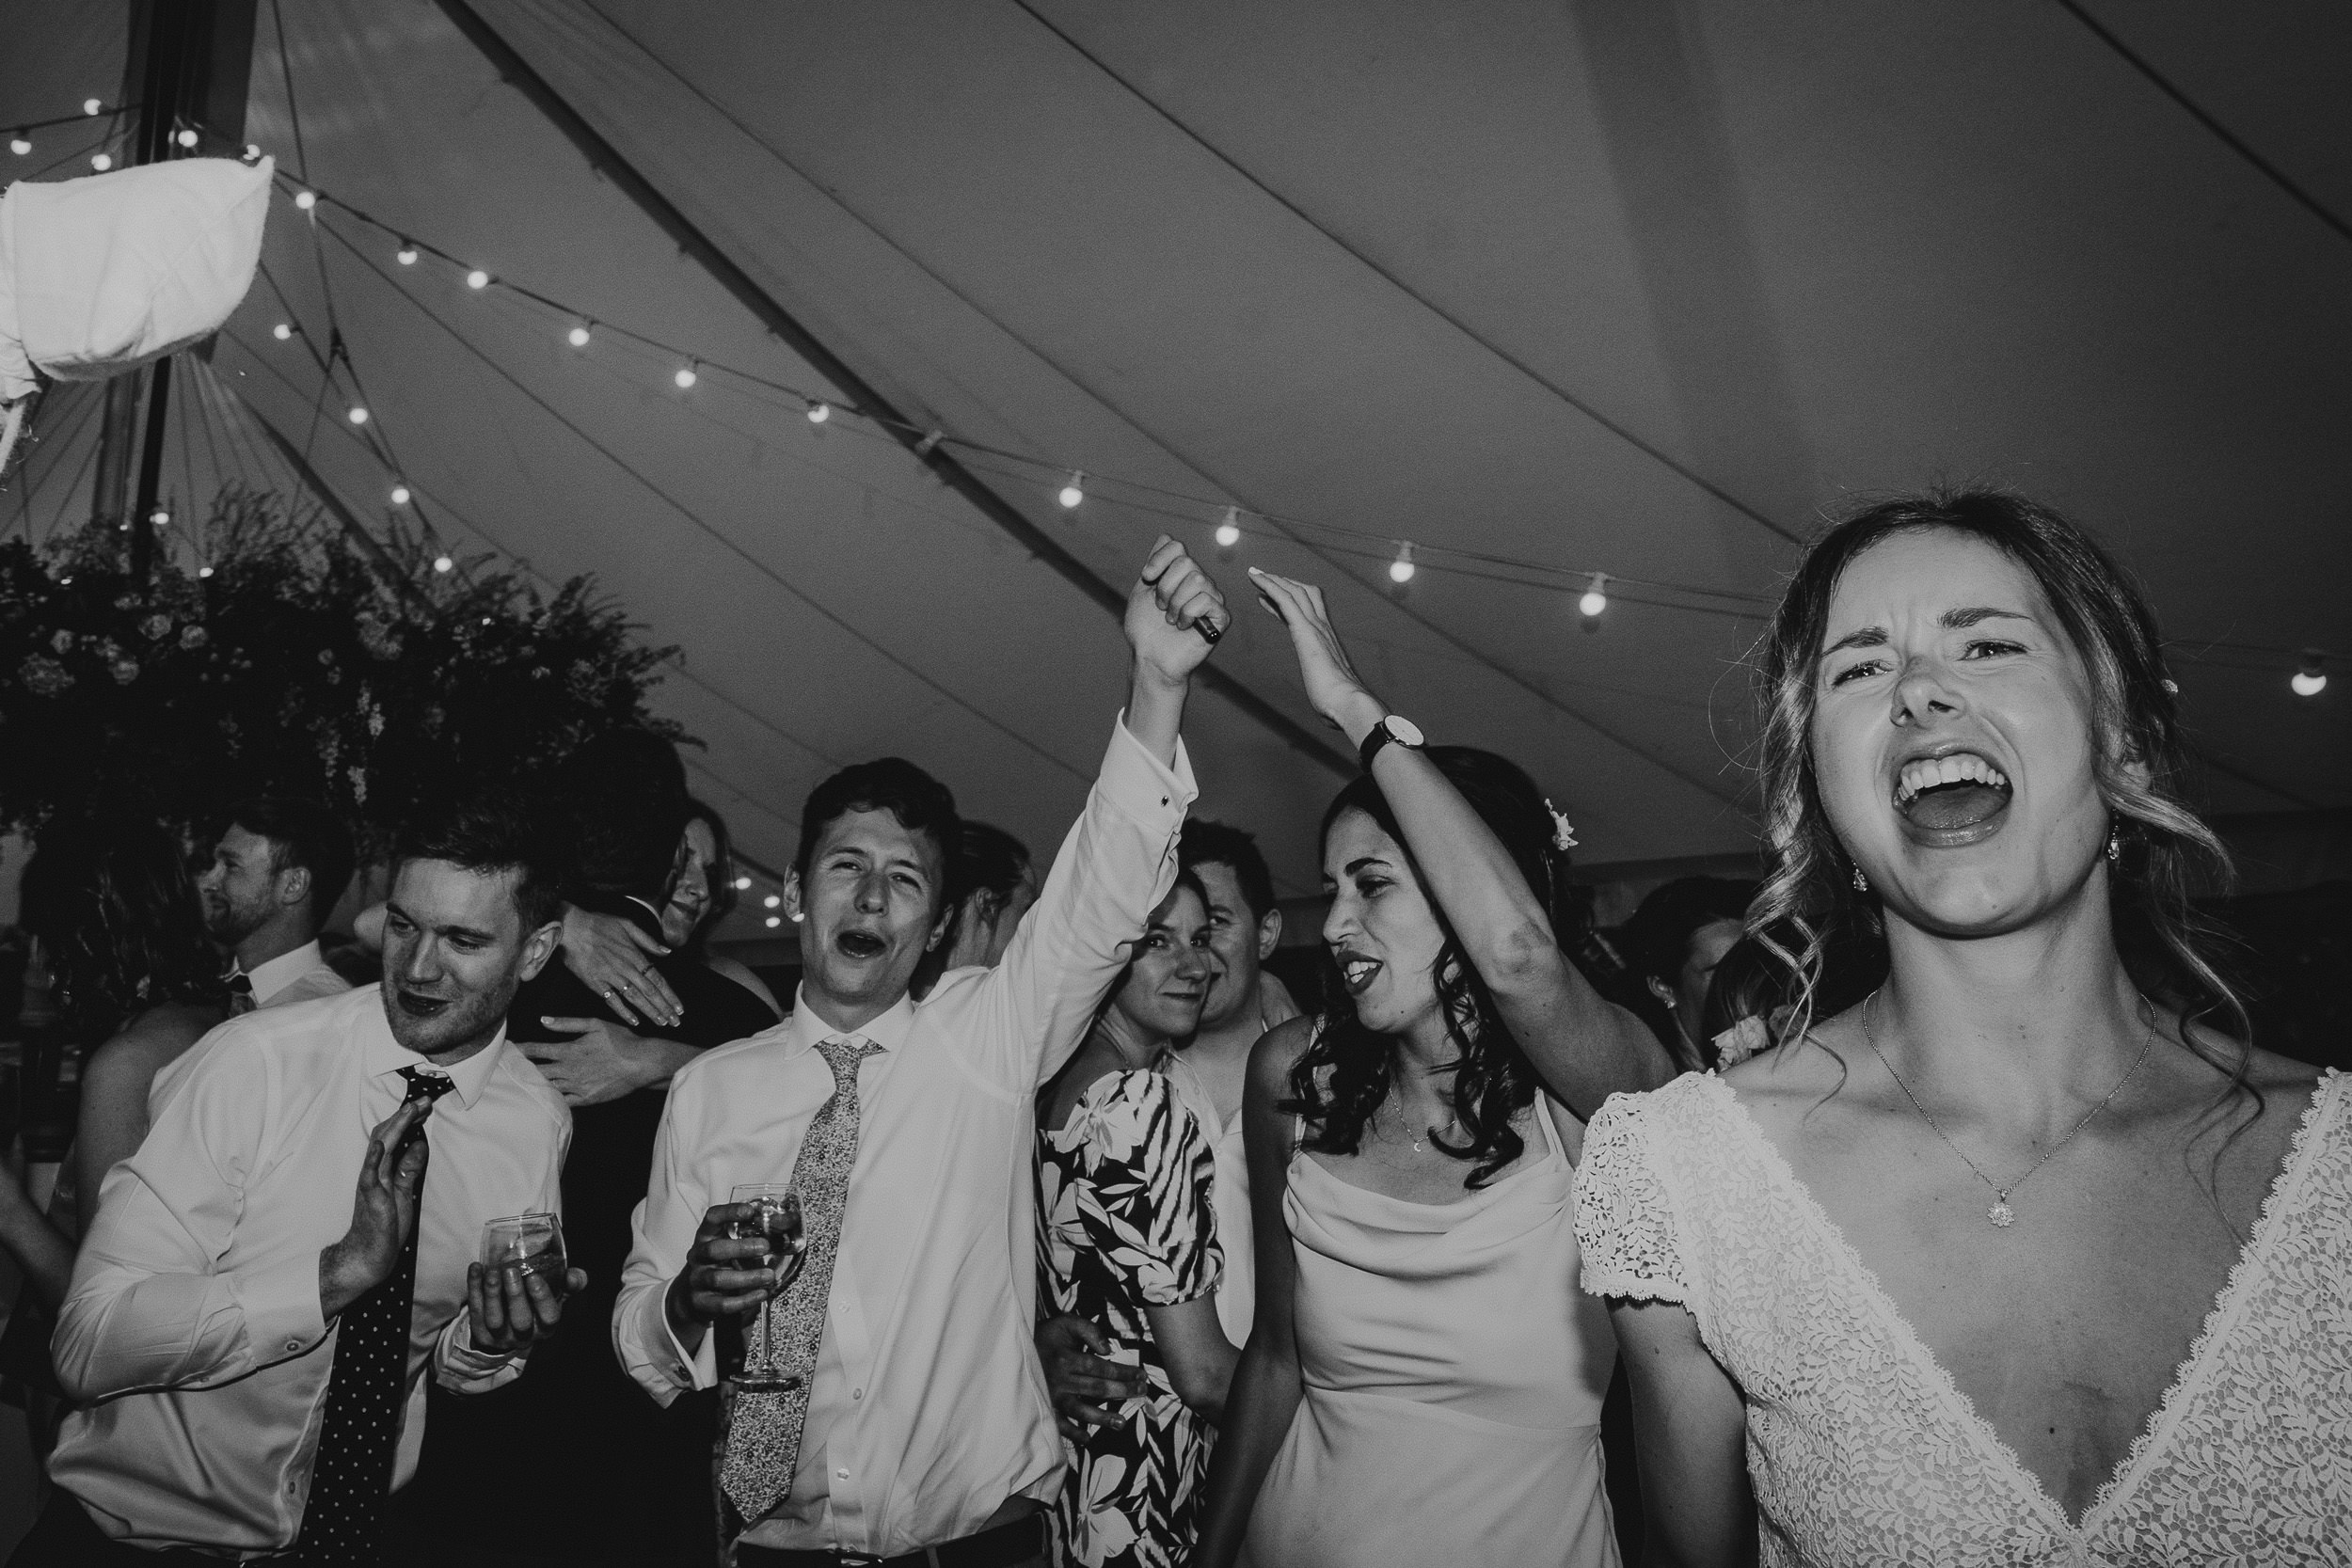 A black and white wedding photo capturing a group of people dancing in a tent.